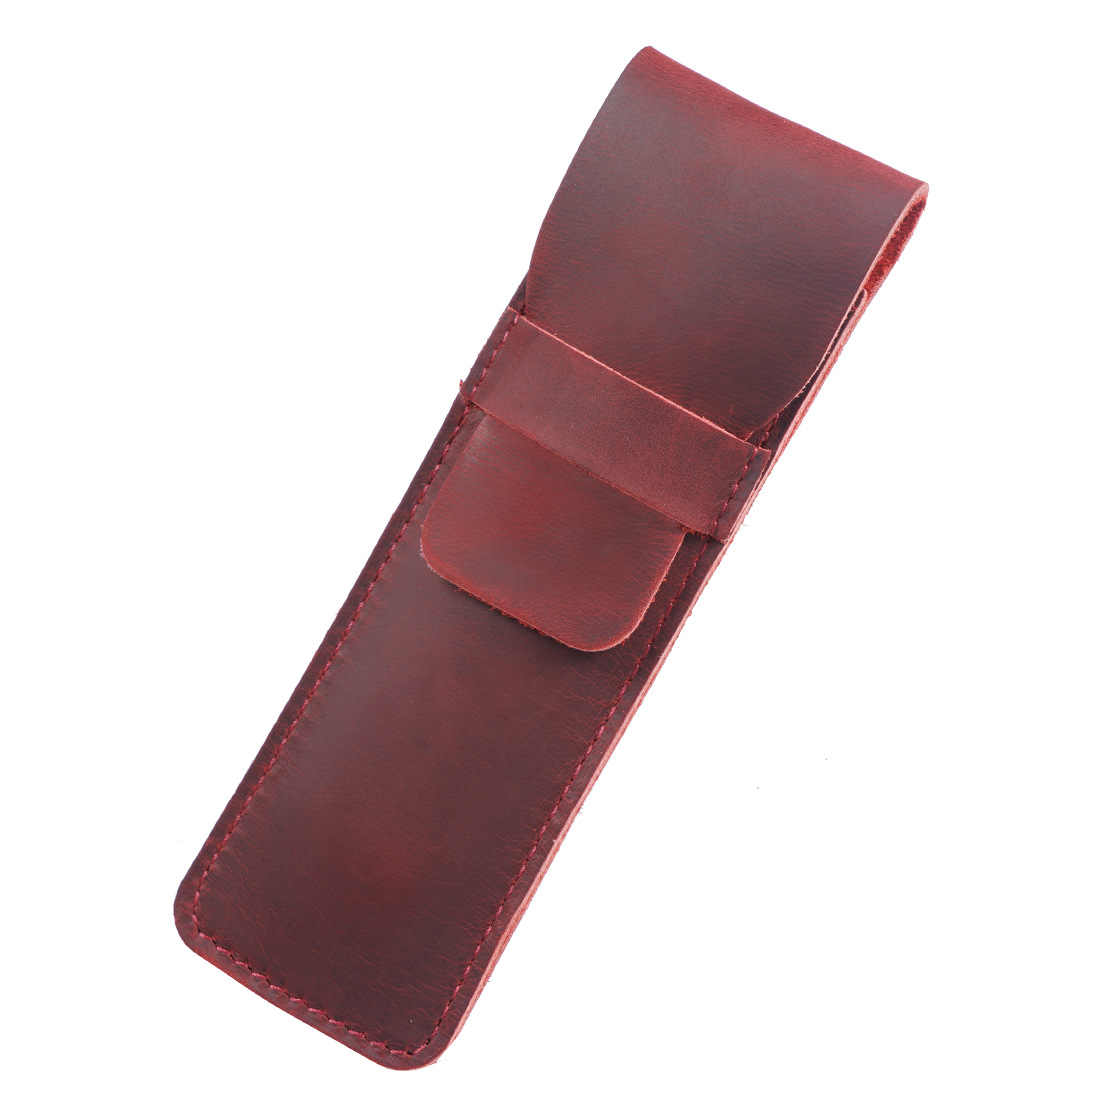 small size burgundy:165*50mm